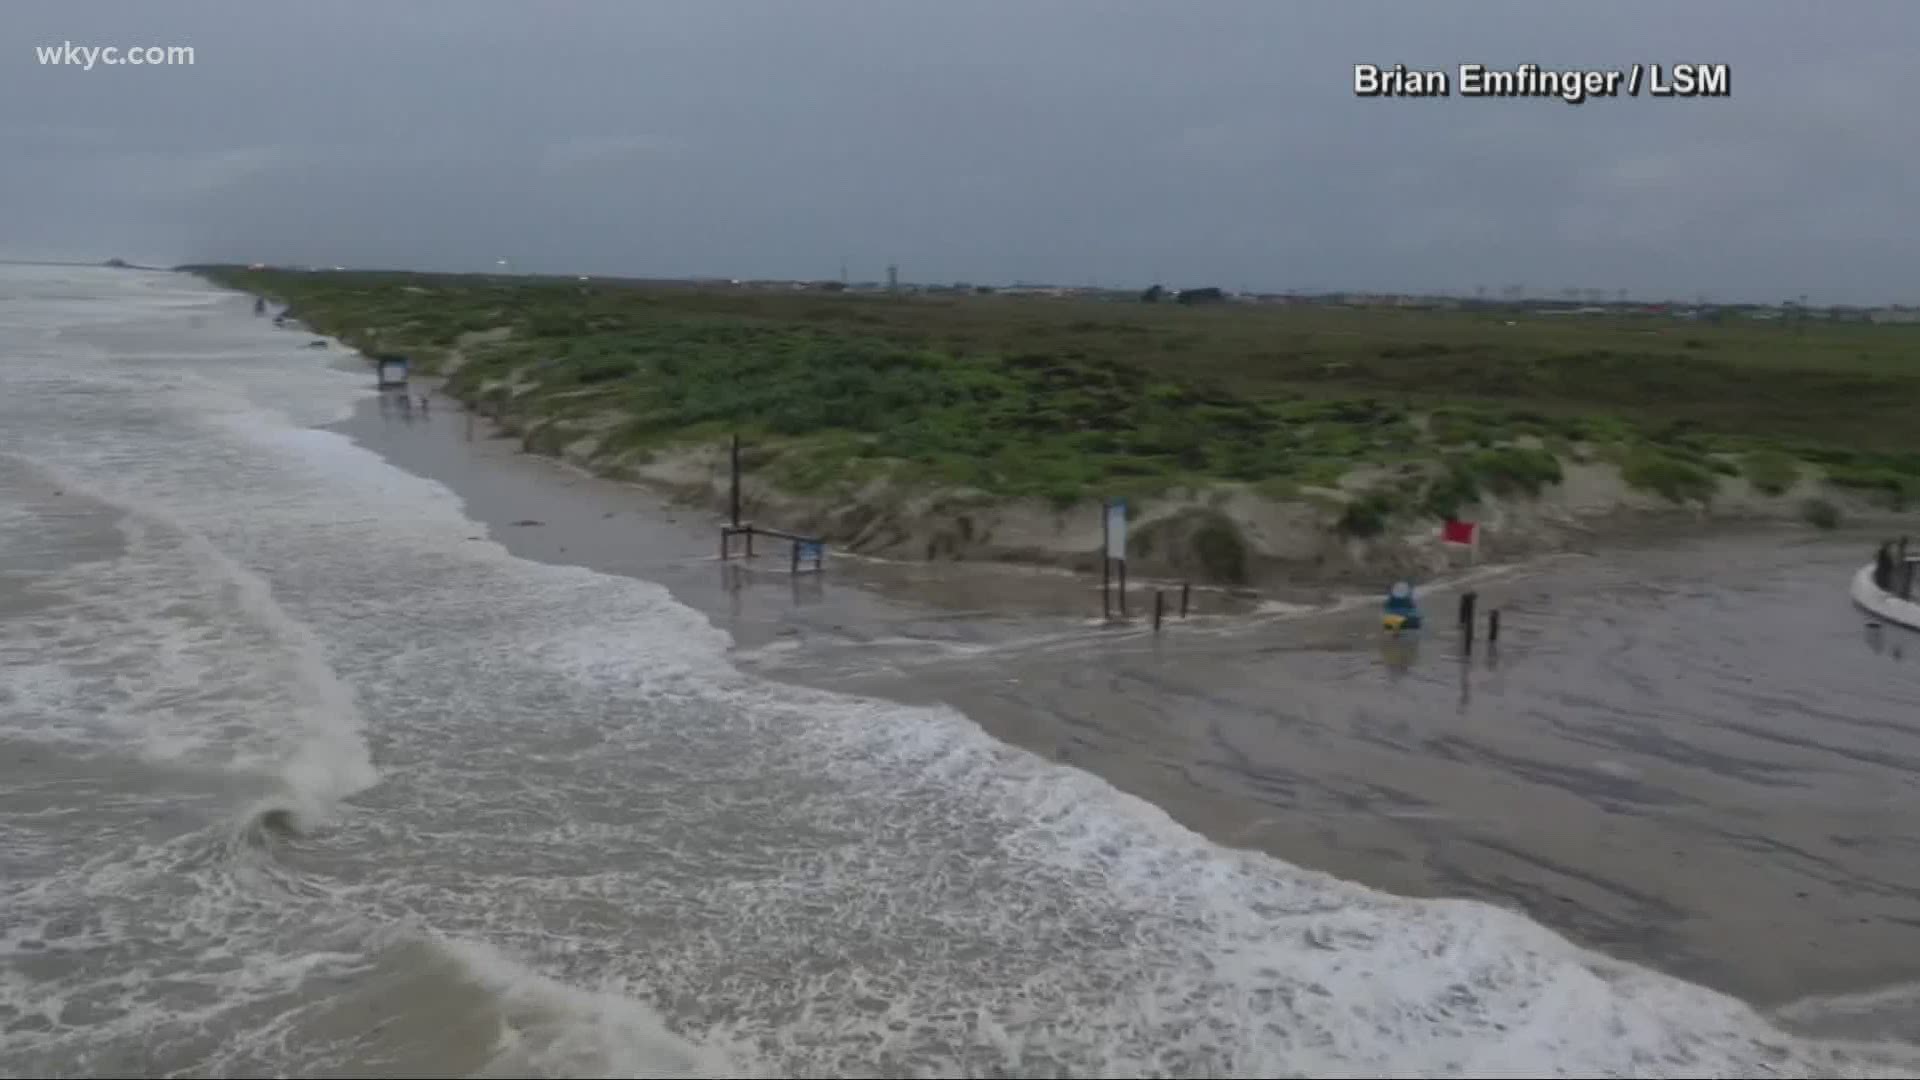 Check out this video from South Padre Island, Texas, near where Hurricane Hanna made landfall.  The Category 1 storm whipped up waves & caused several feet of surge.